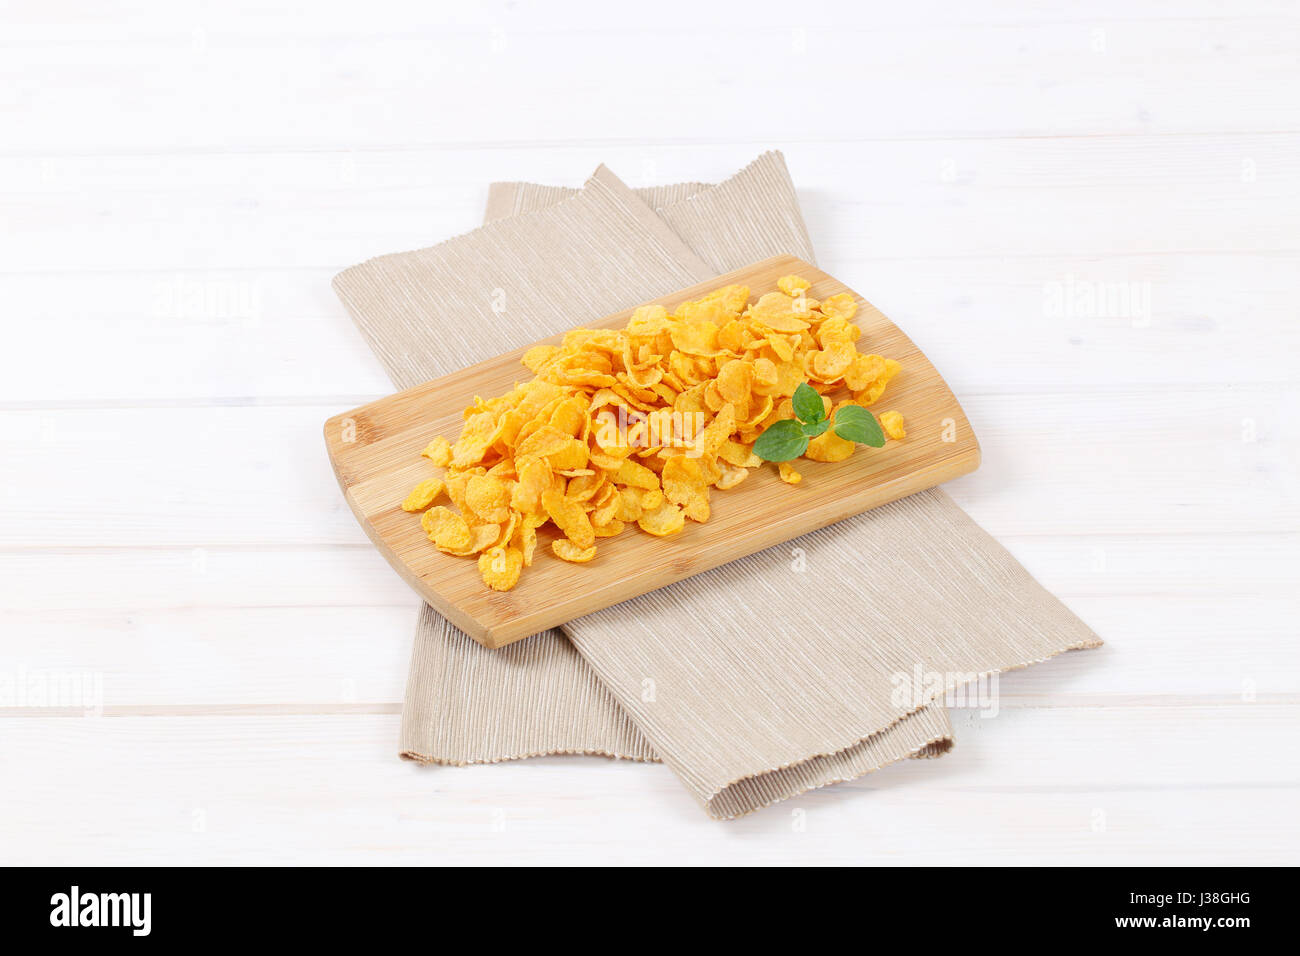 pile of corn flakes on wooden cutting board Stock Photo